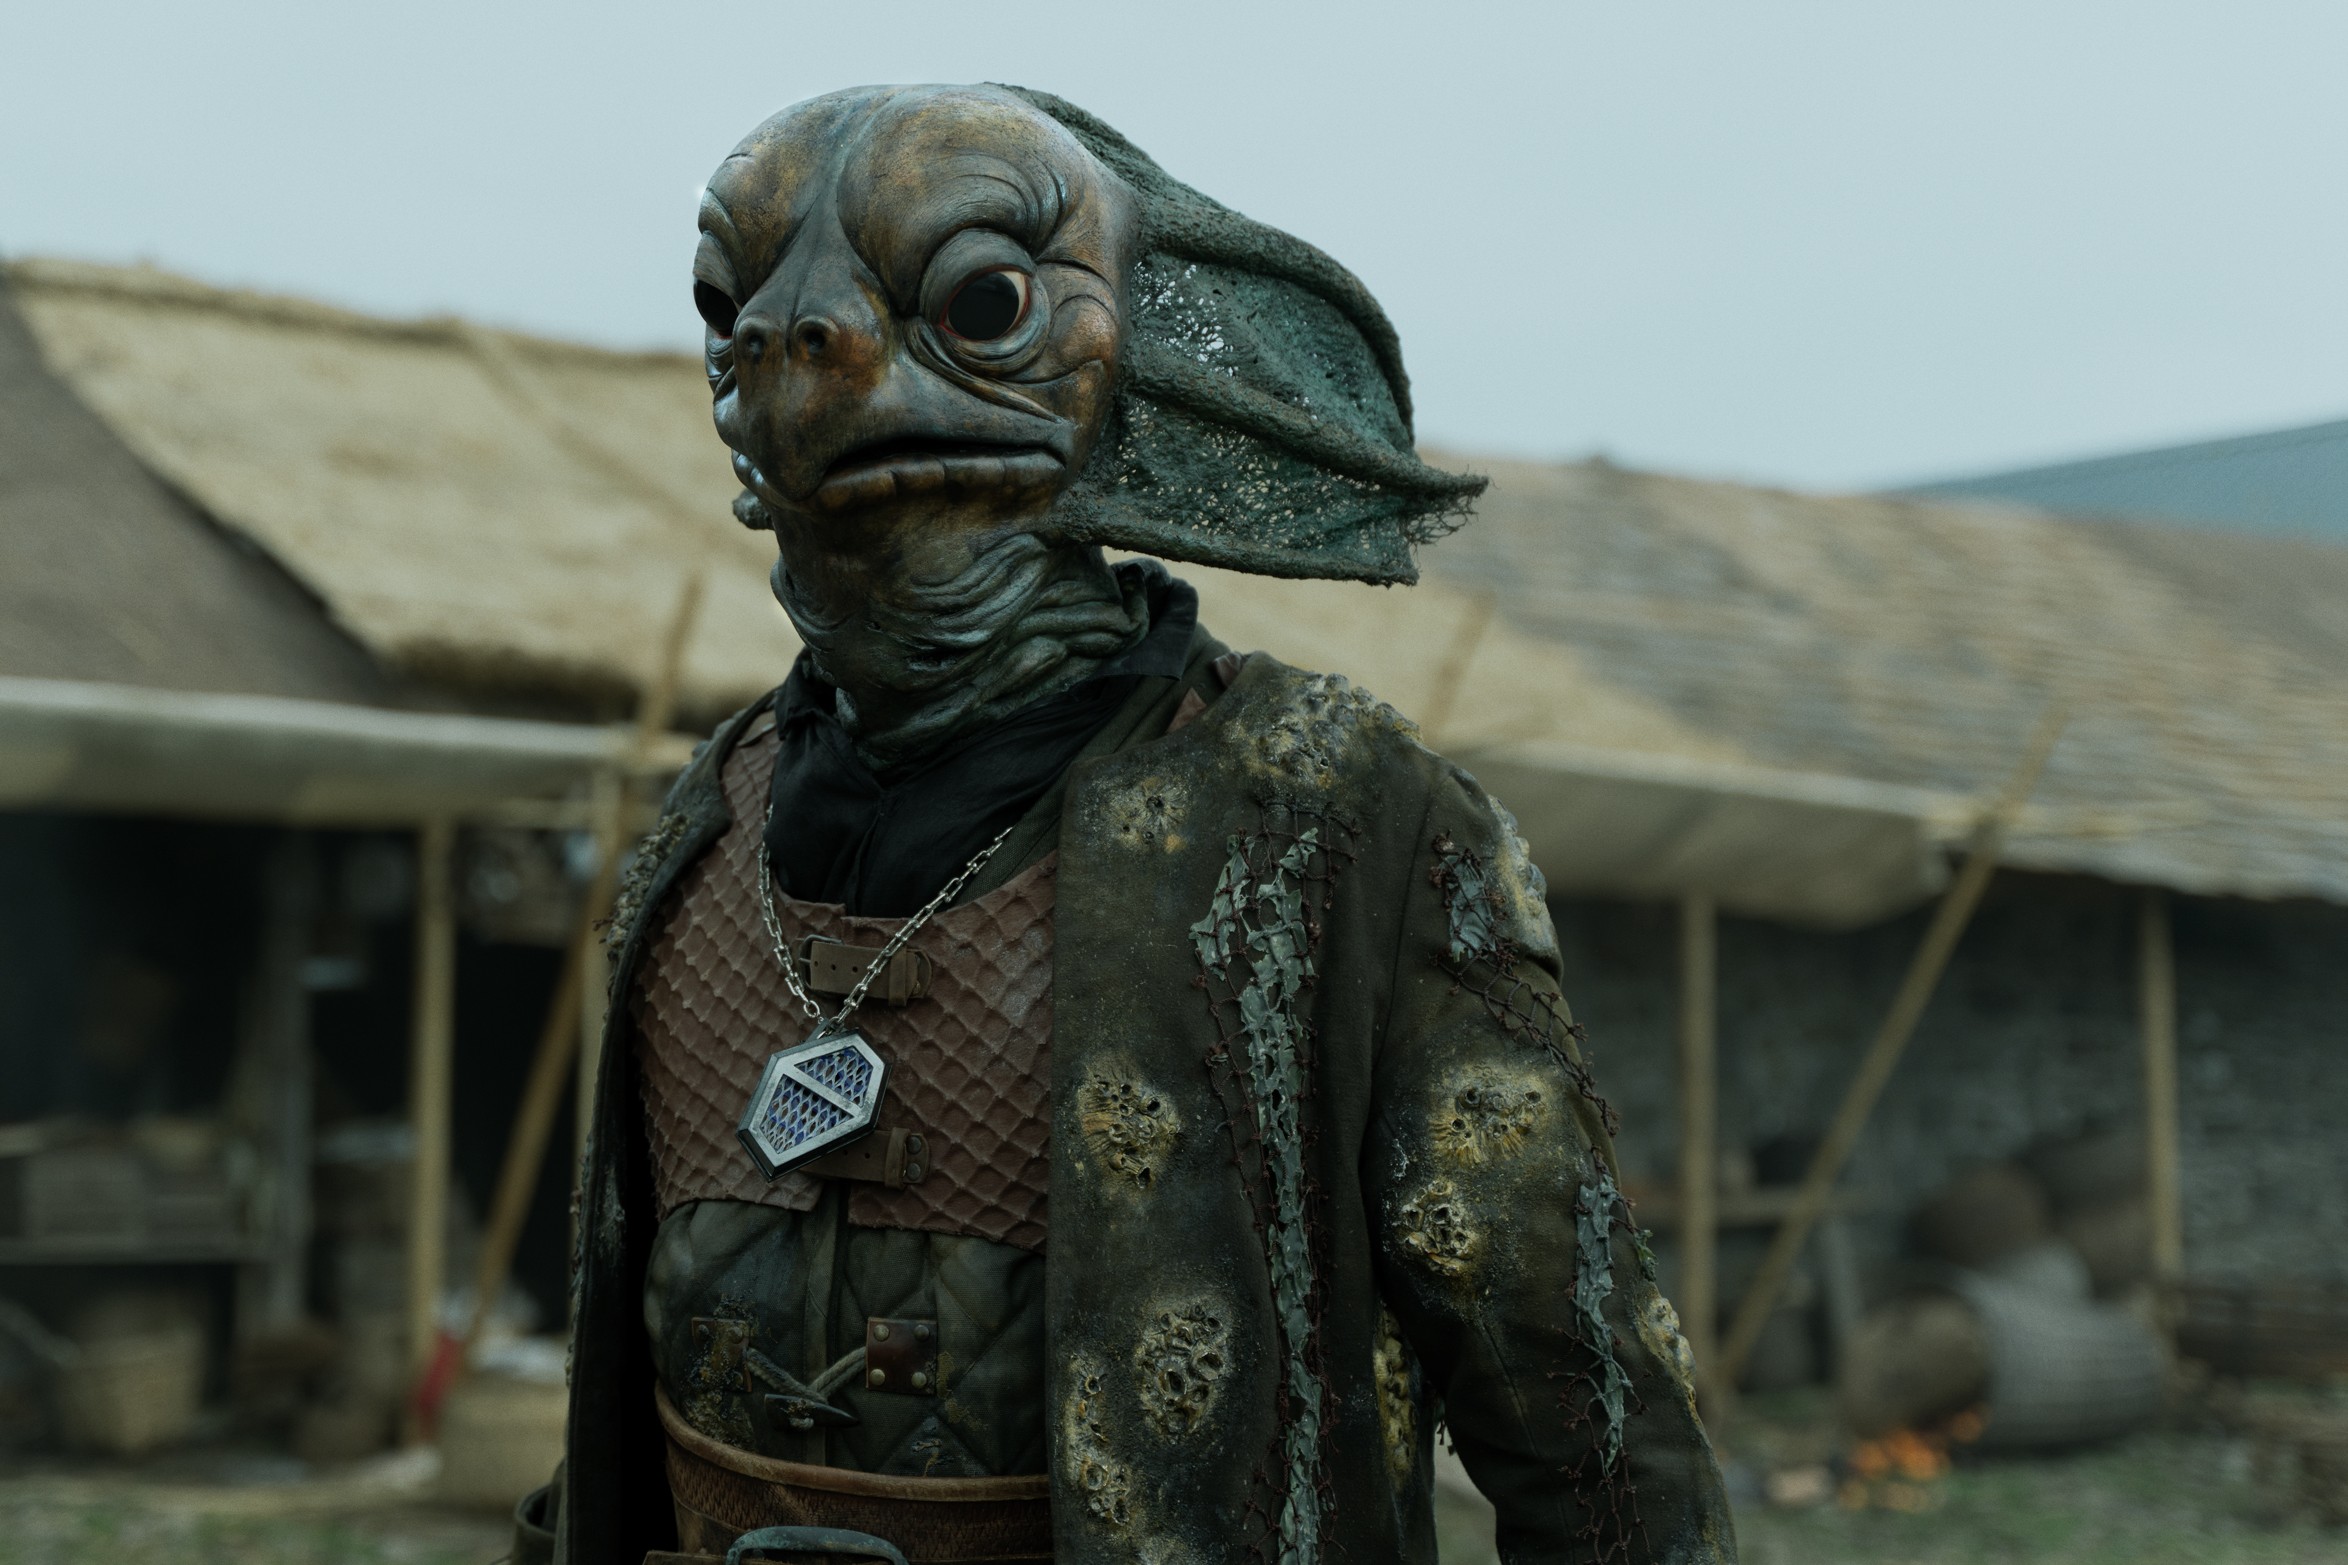 Who are the Sea Devils in Doctor Who?